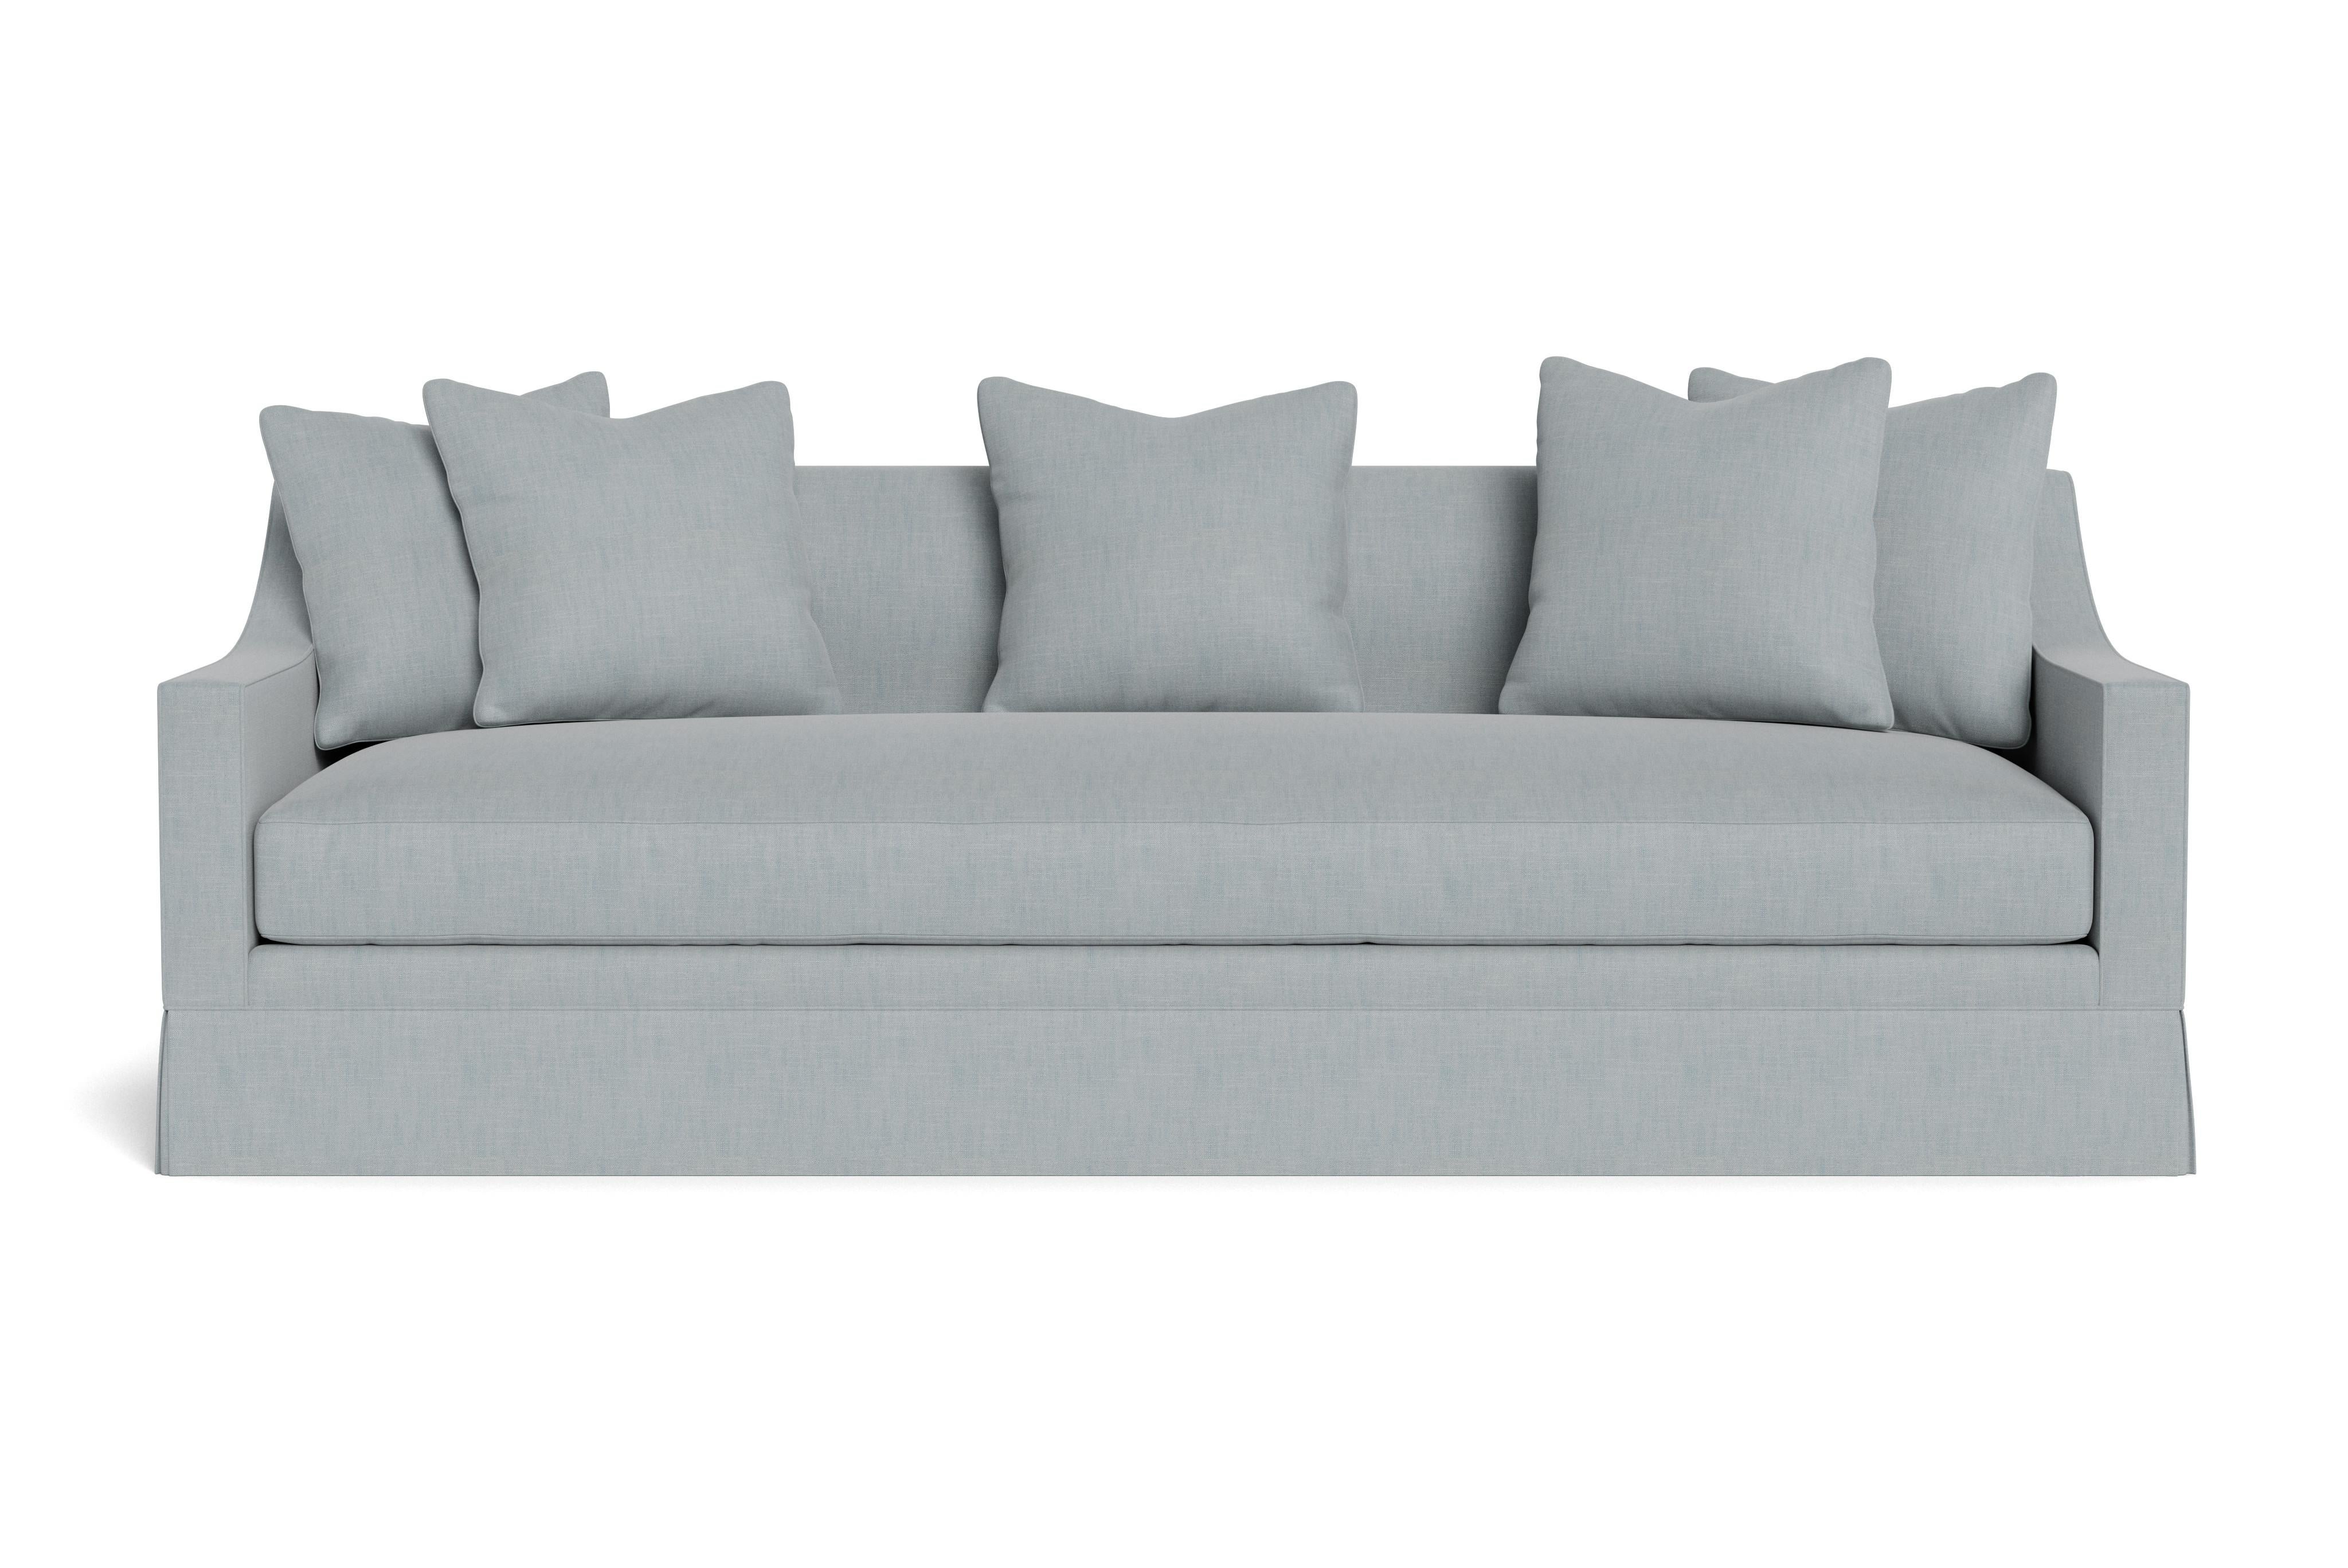 A handsome, modern skirted sofa with sloped arm. Sleek tailoring complemented by a single seat cushion and four loose pillows 21